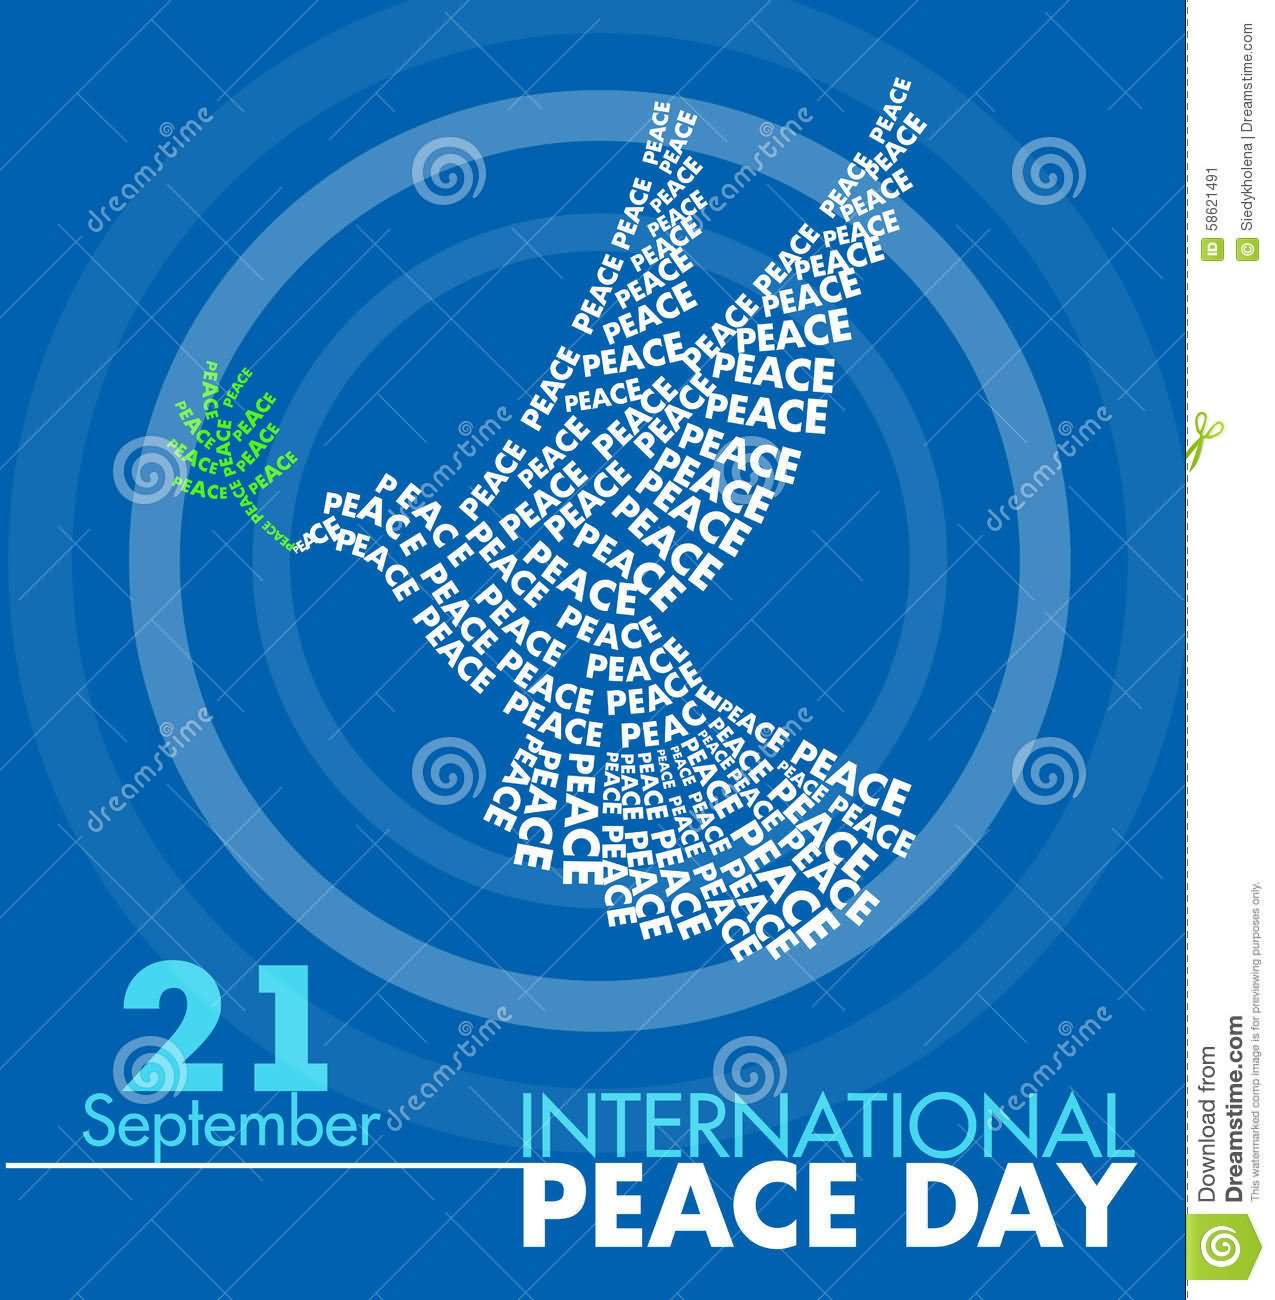 21 September International Peace Day Dove Of Letters Poster Image